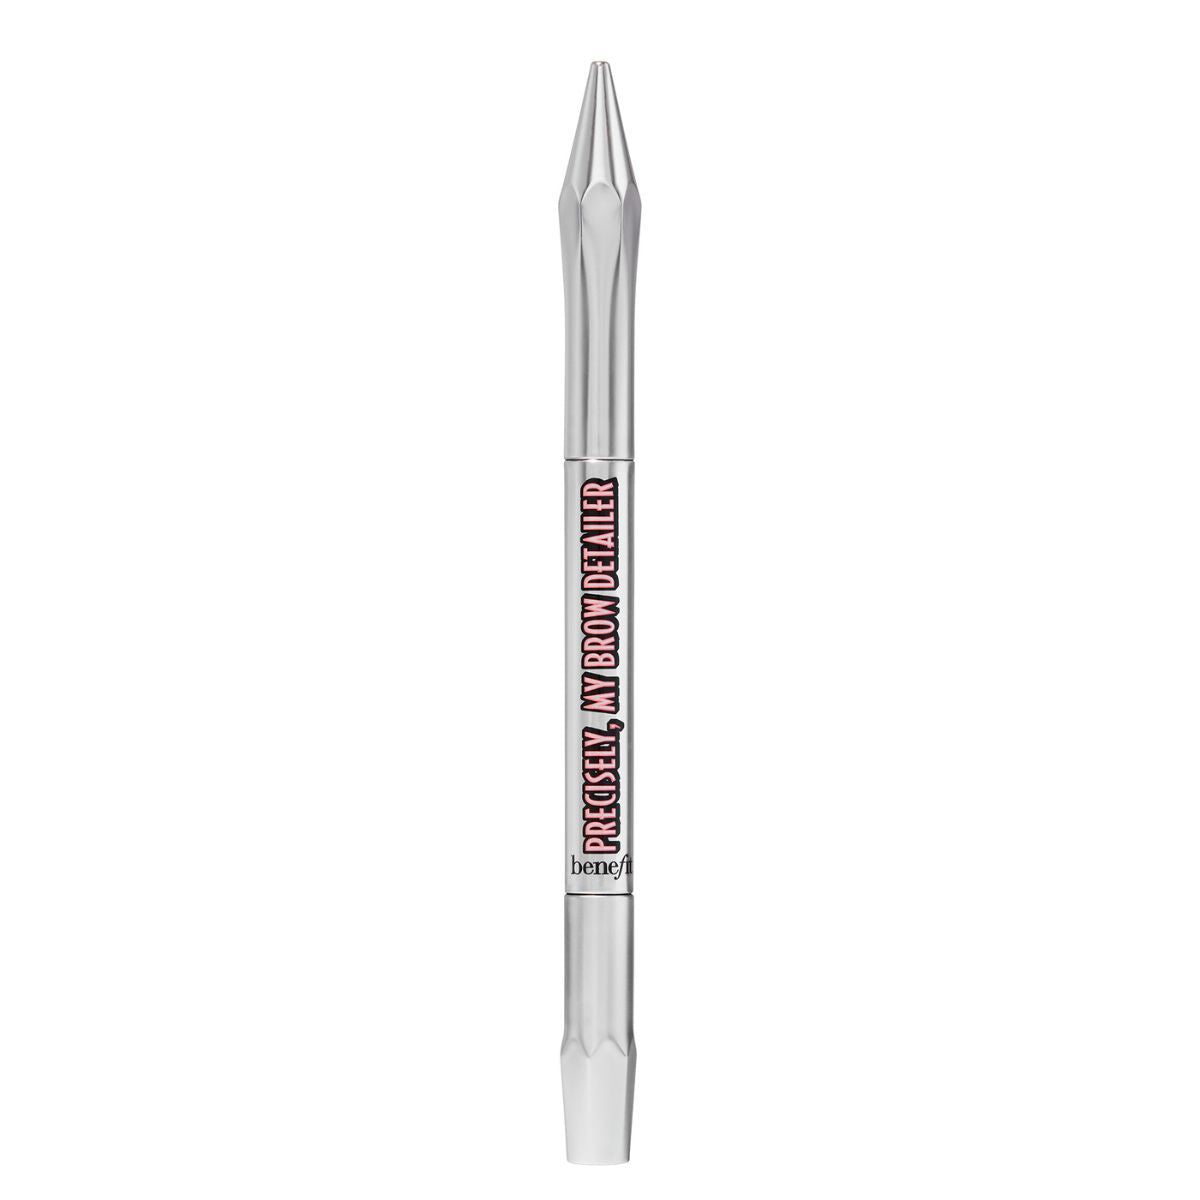 Benefit Precisely My Brow Detailer Pencil